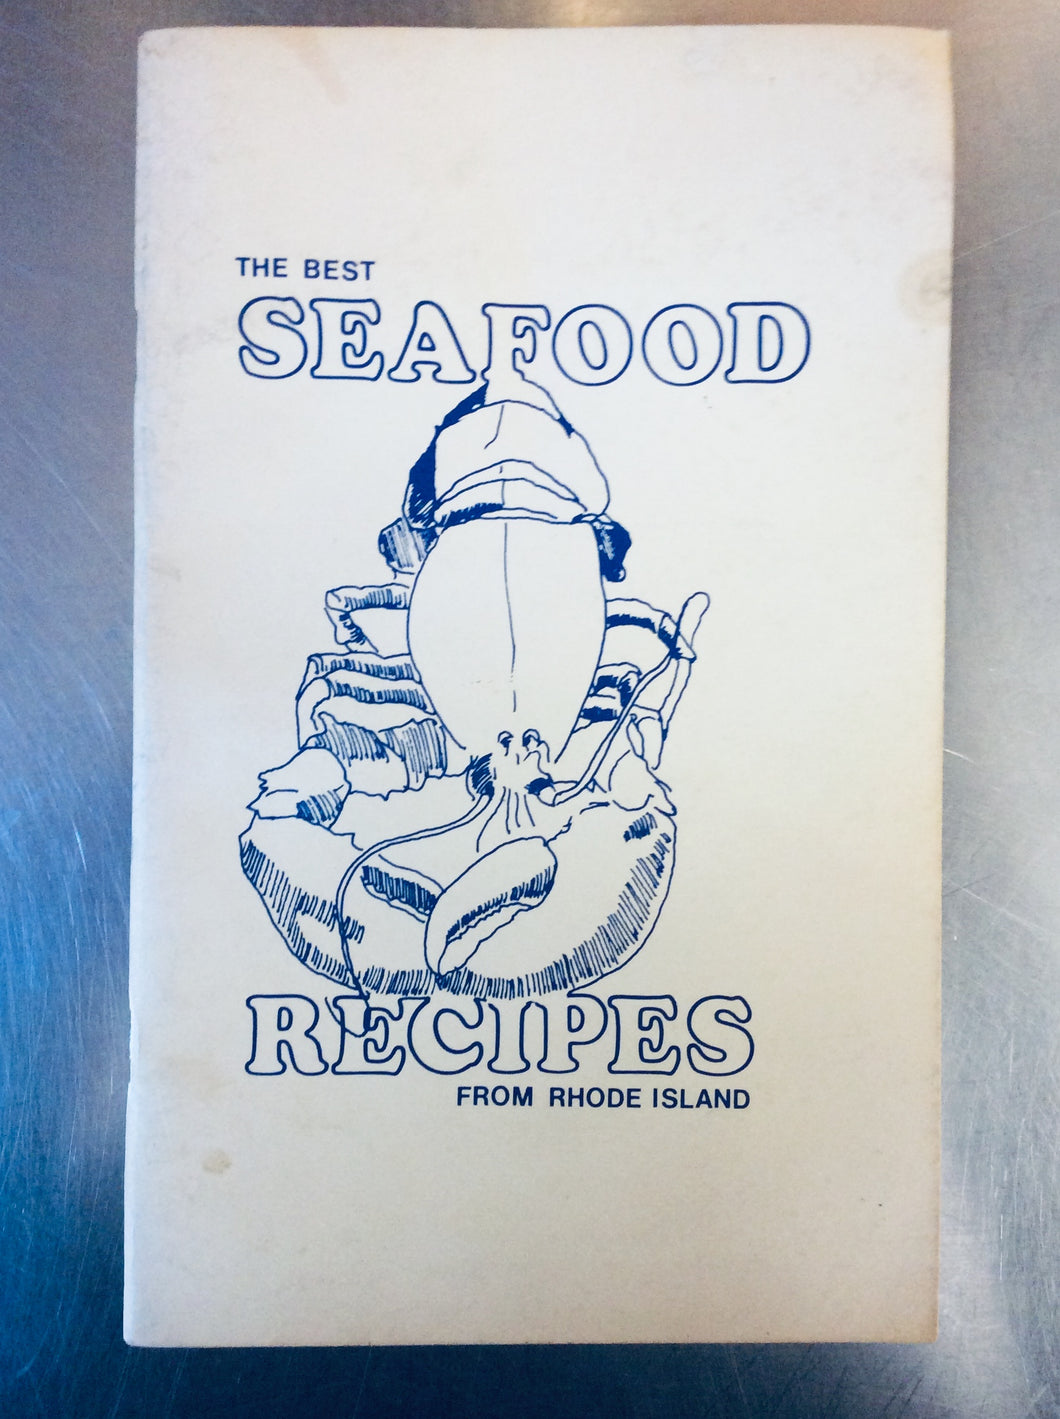 The Best Seafood Recipes from Rhode Island